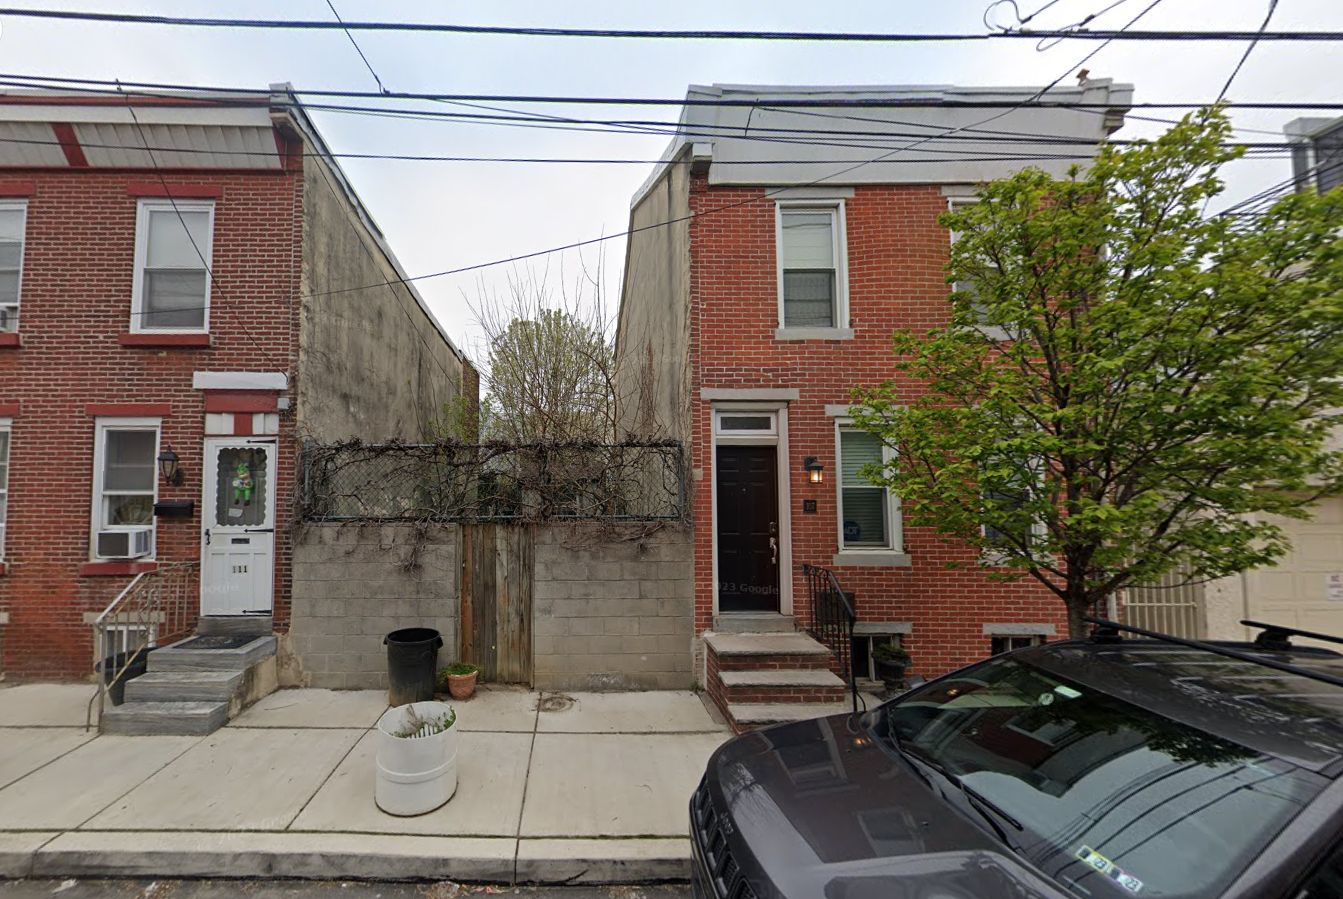 109 Watkins Street. Site conditions prior to redevelopment. Looking north. March 2023. Credit: Google Maps